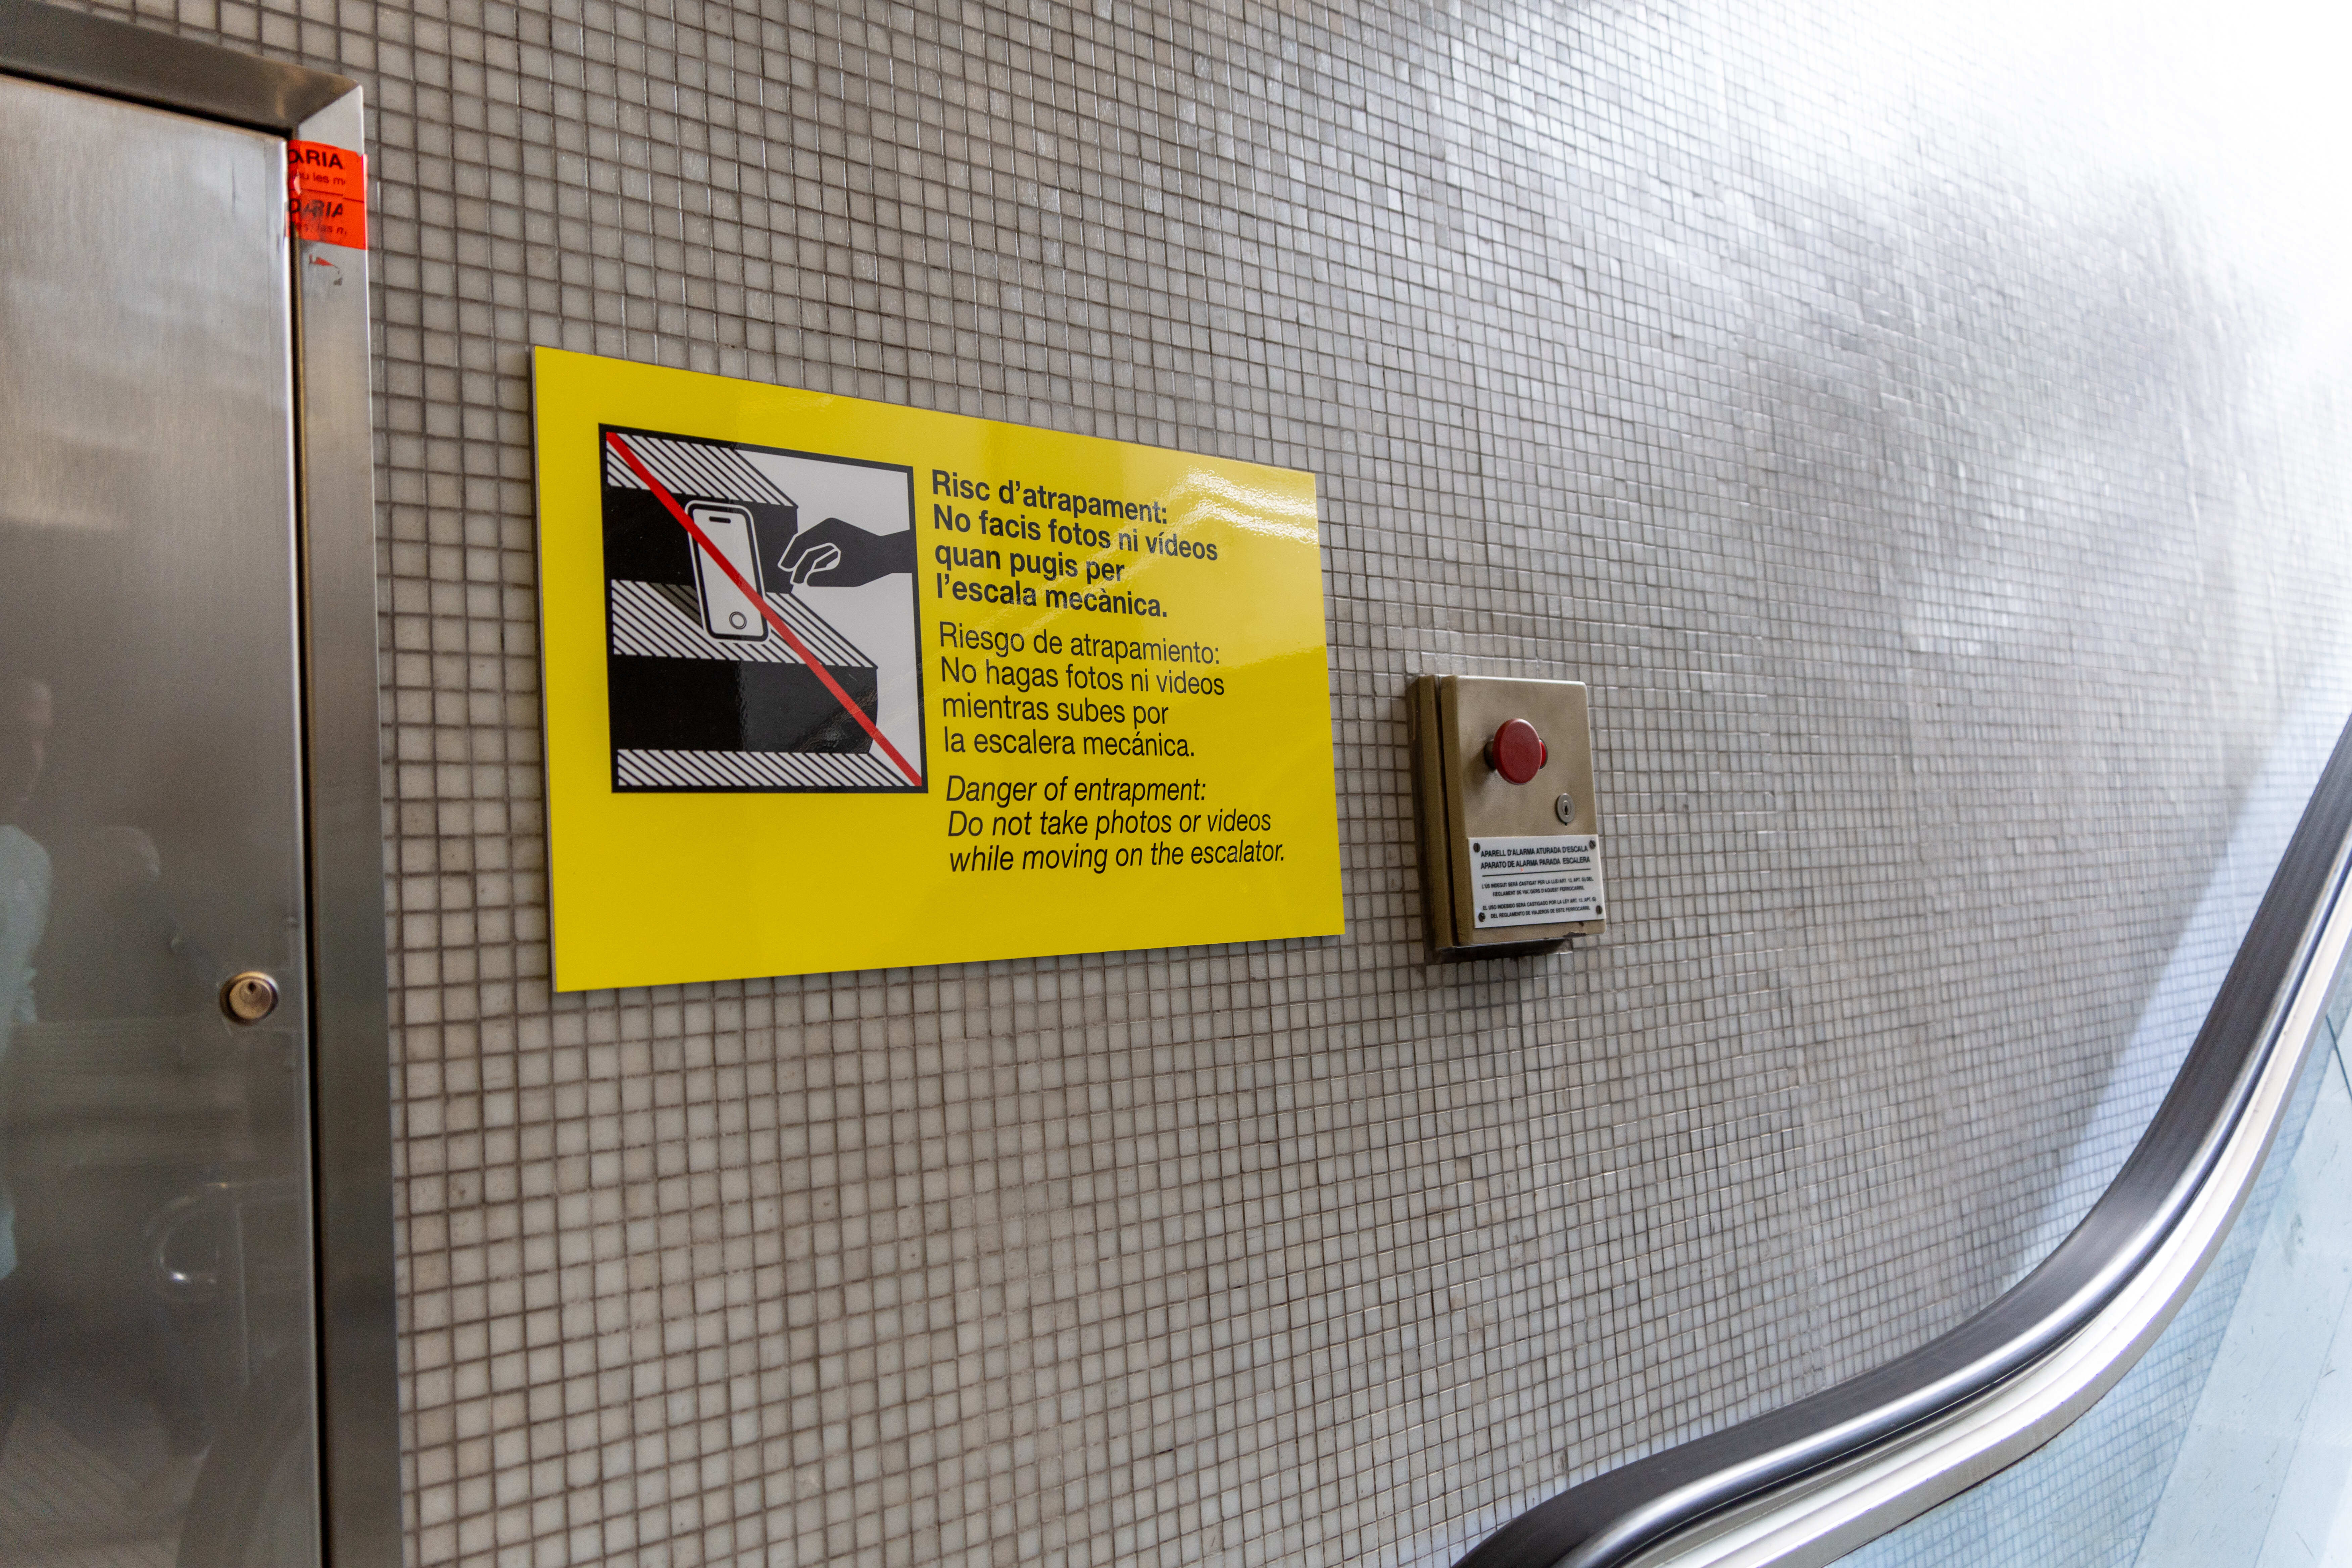 Posters banning tourists from taking photos and videos on the escalators appeared over the weekend